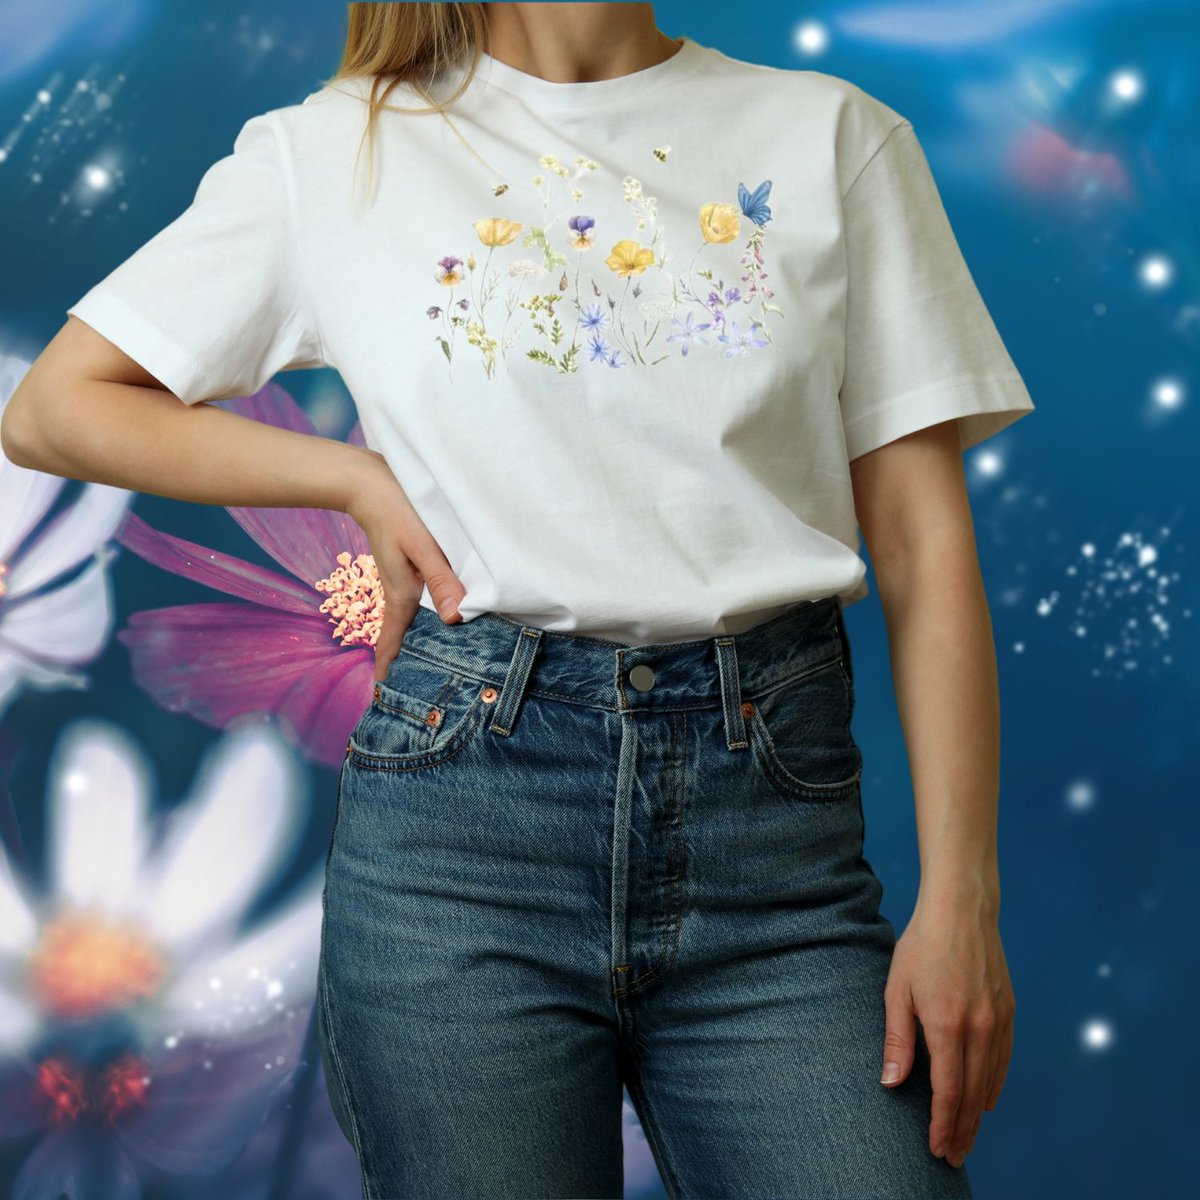 Evening #womaninbizhour As the weather seems to be getting better here is my wildflower design tee with 20% off. Details 👇